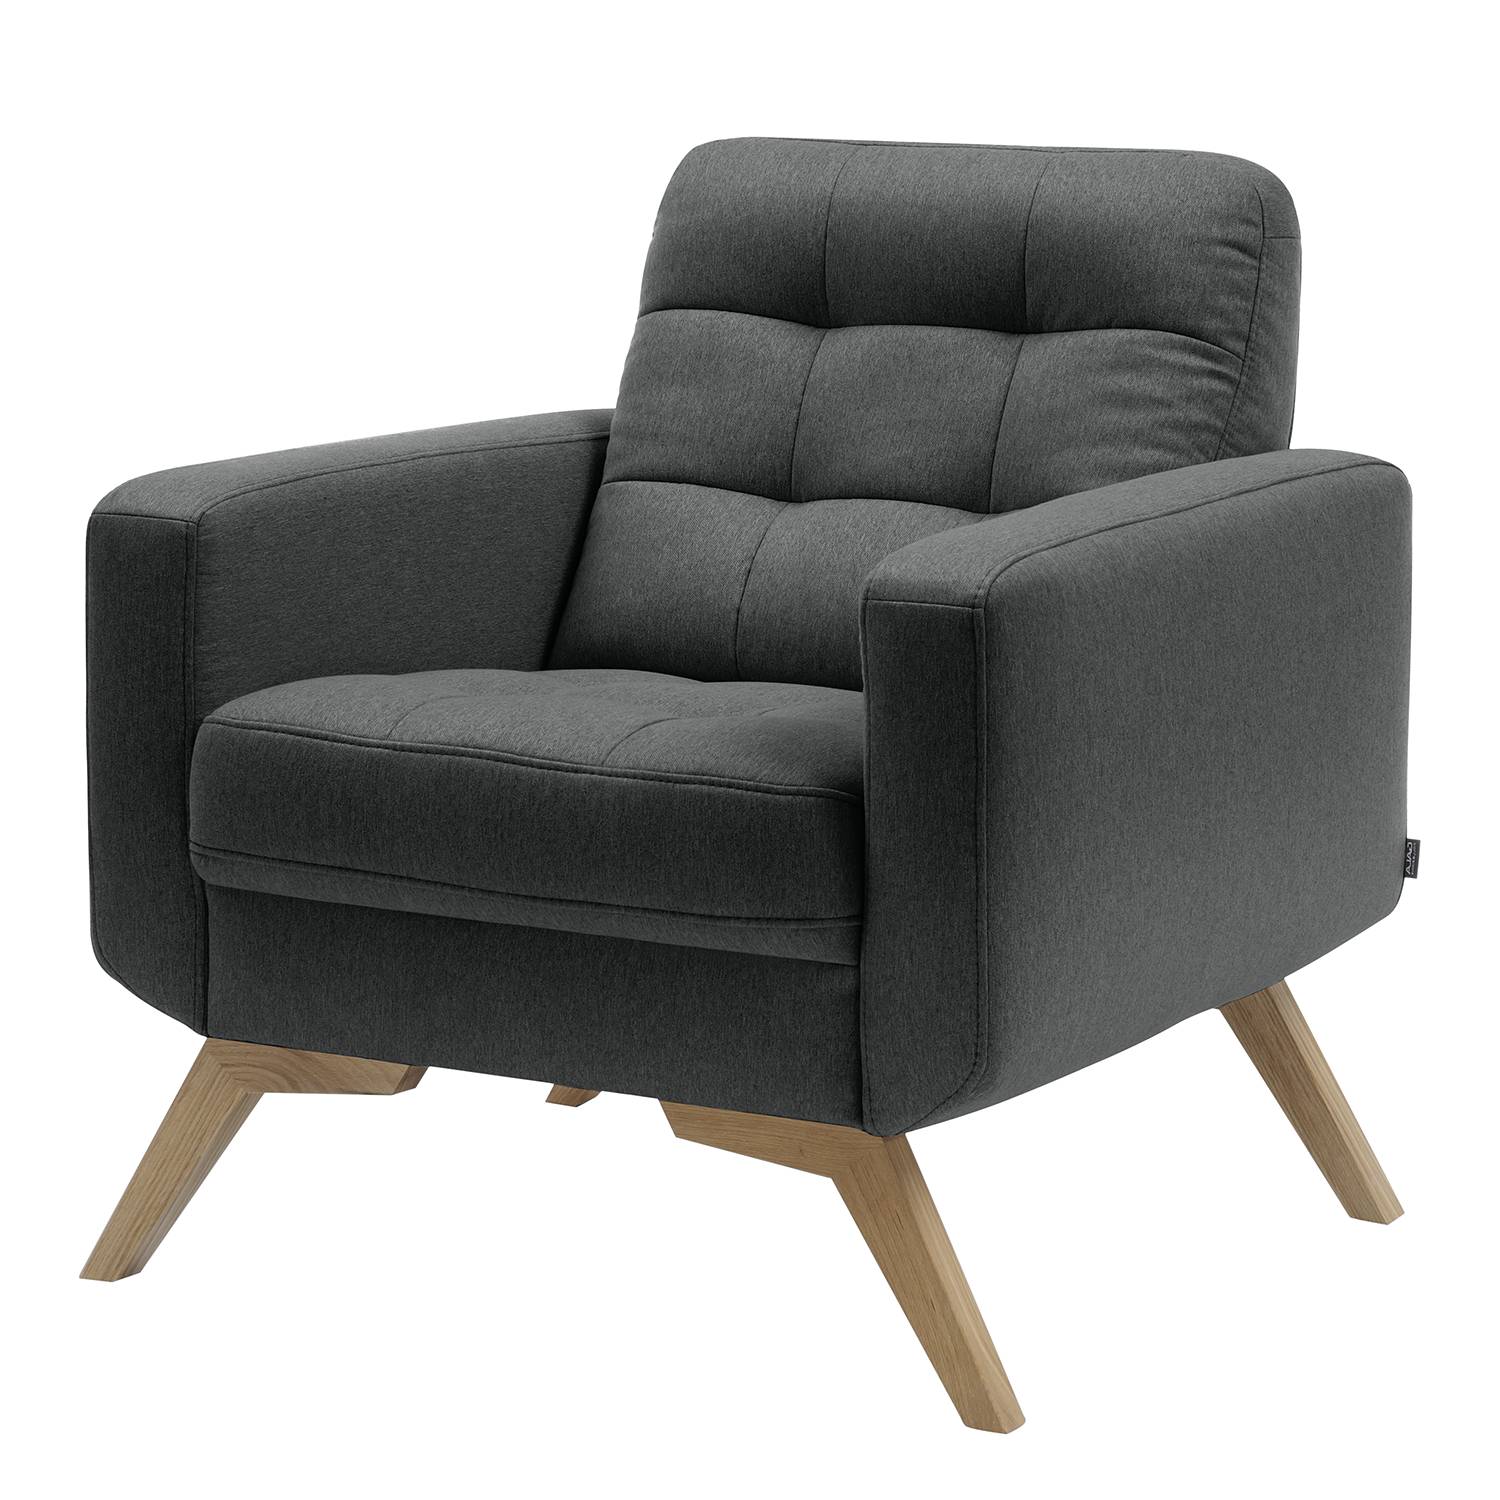 Image of Fauteuil Somoto 000000001000128311